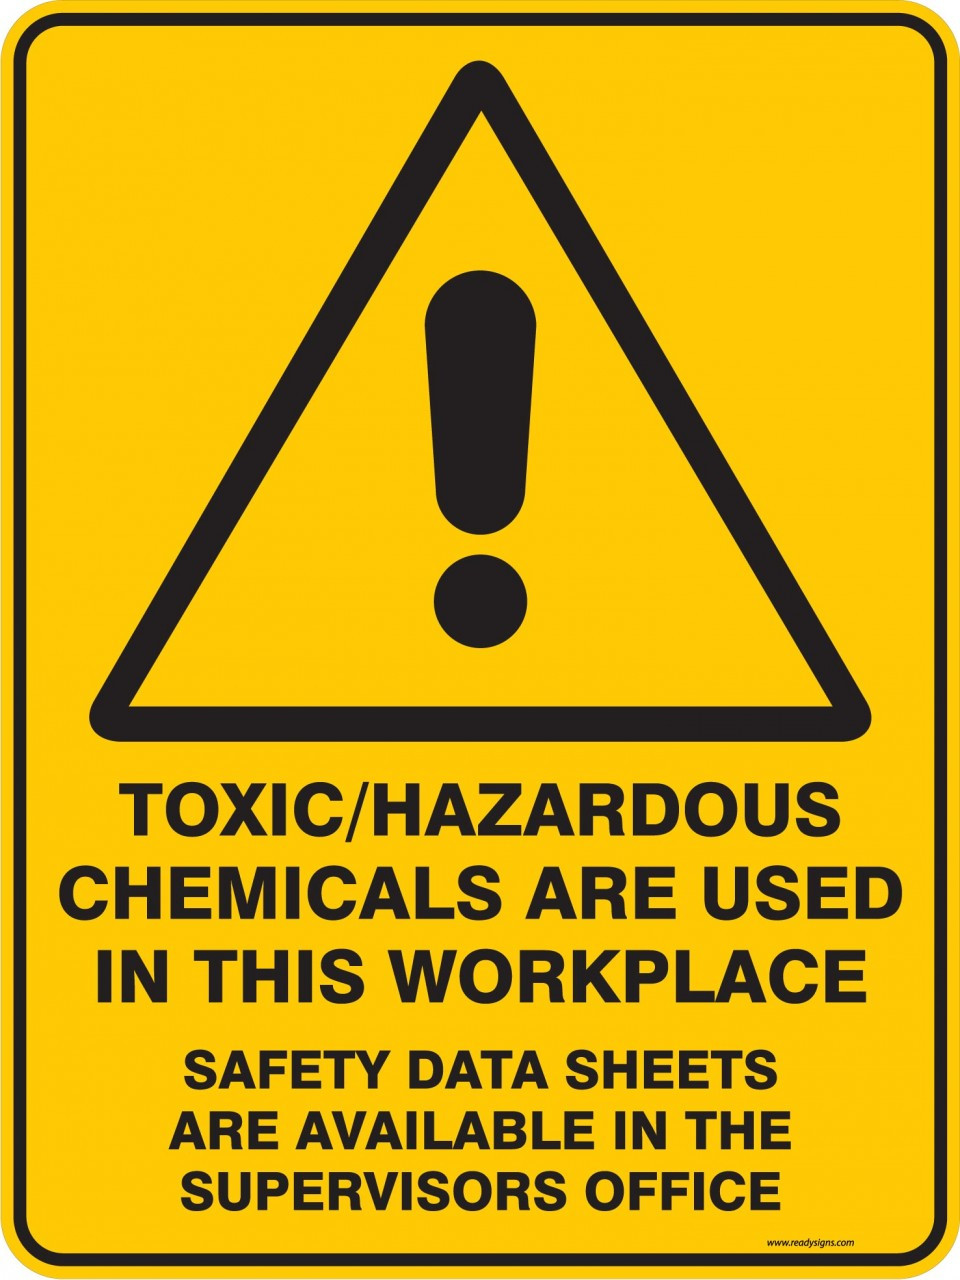 Warning Sign TOXIC HAZARDOUS CHEMICALS ARE USED IN THIS WORKPLACE.